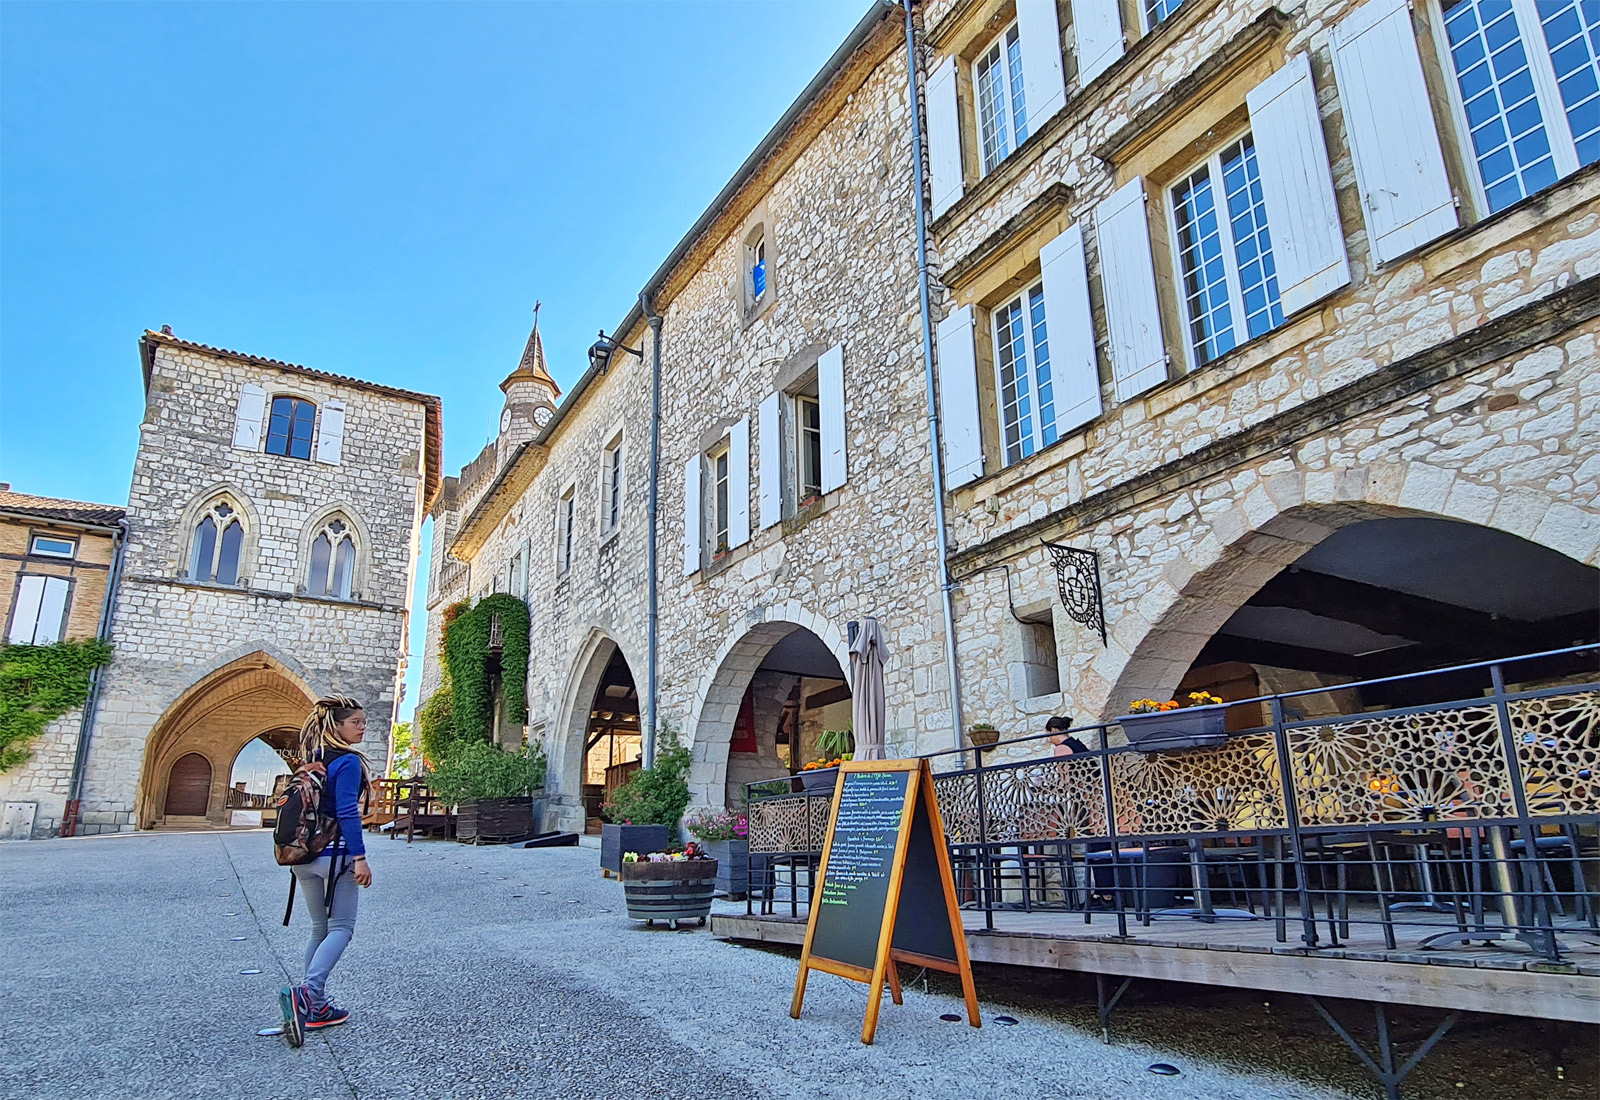 Visit of the bastide town of Monflanquin